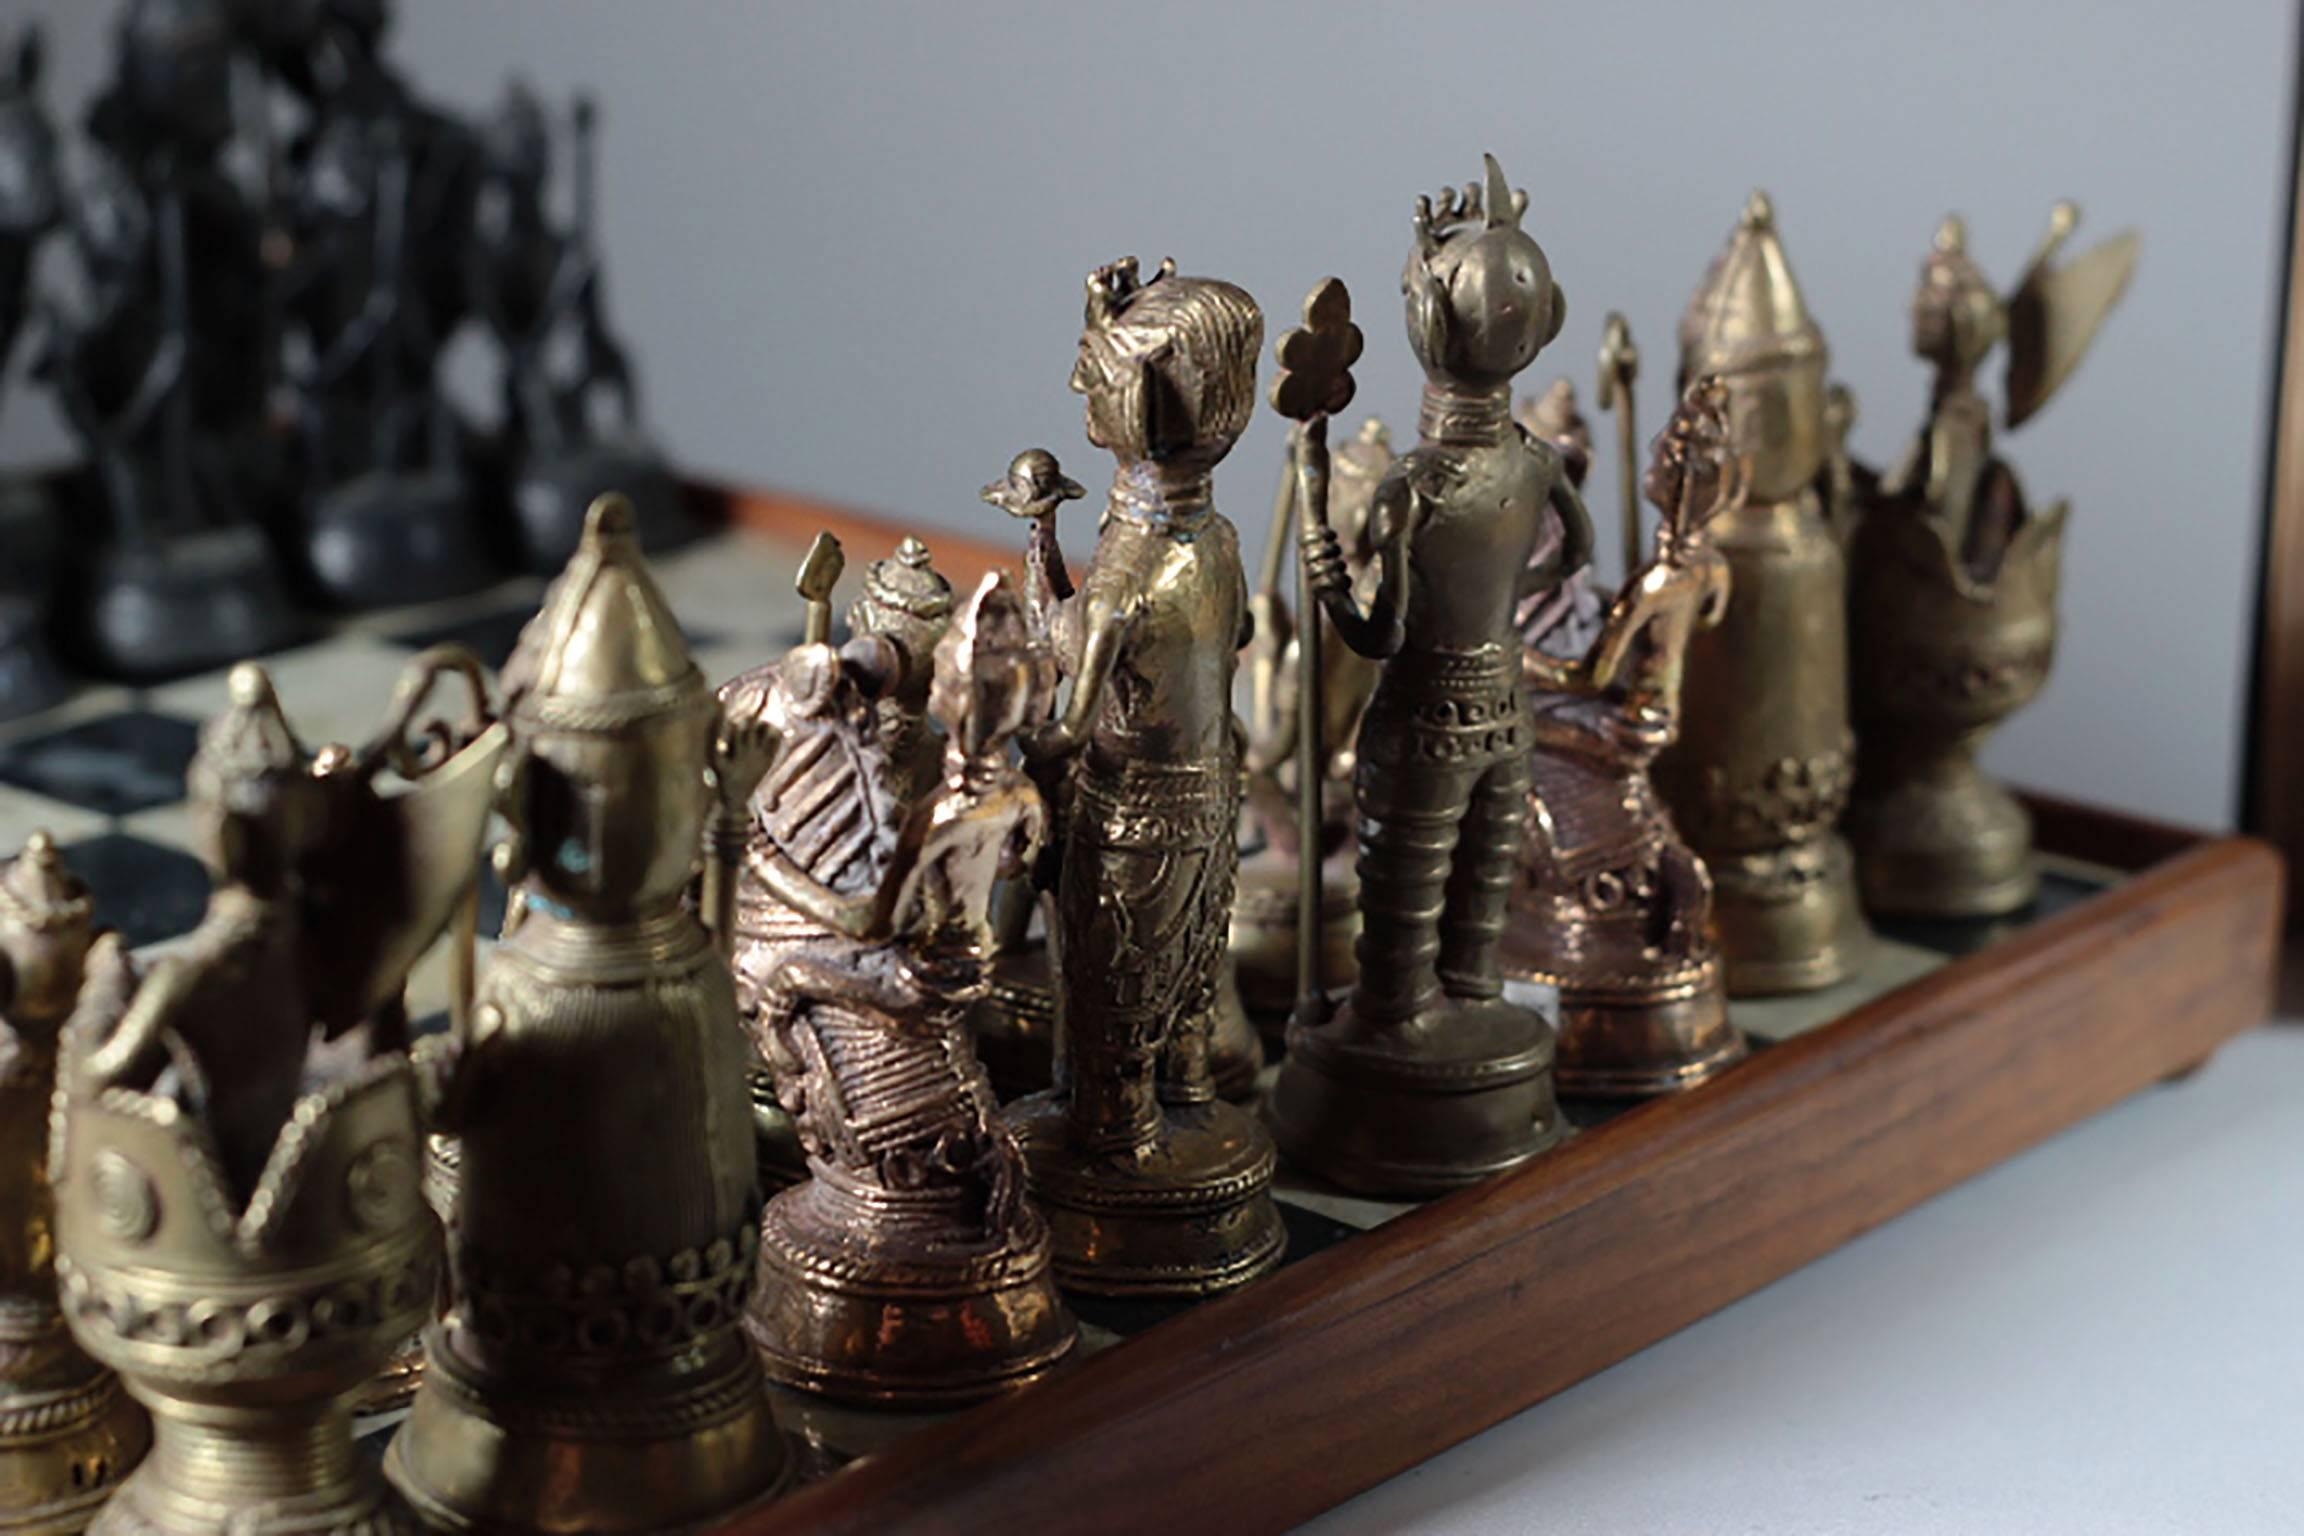 Solid brass chess pieces varying in sizes from 3